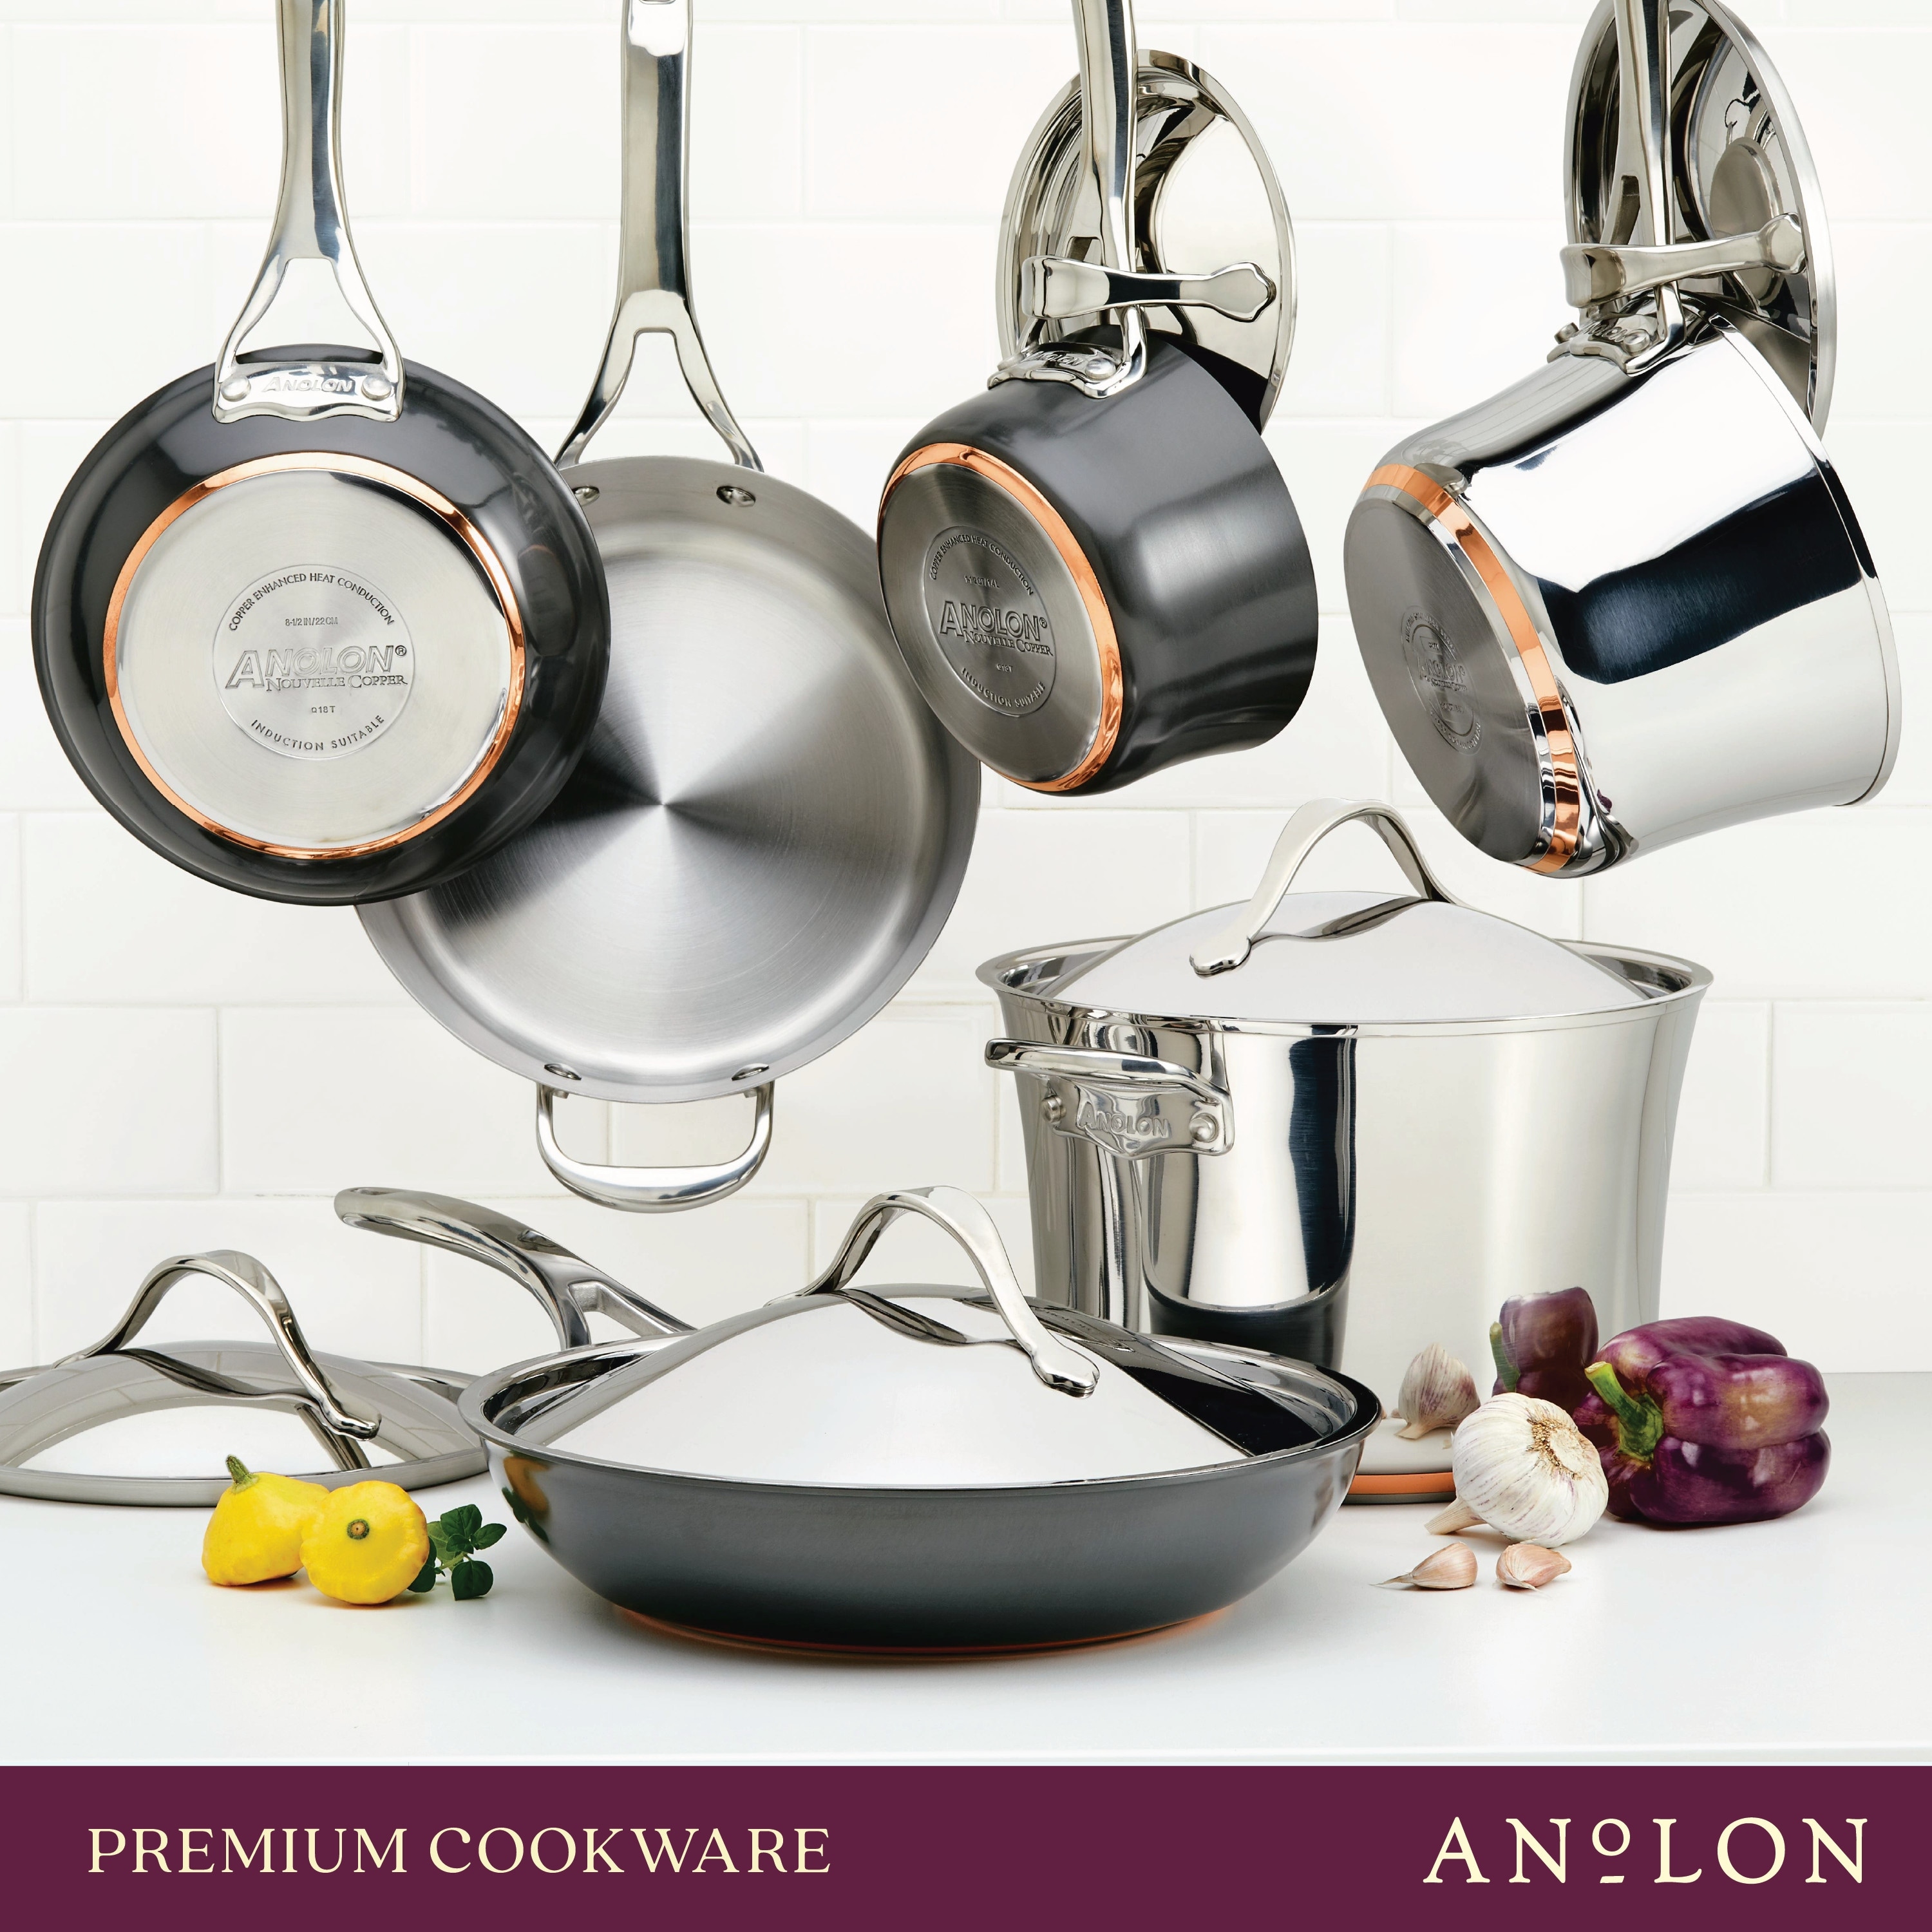 https://ak1.ostkcdn.com/images/products/is/images/direct/4951879eca5ee8a90e23dcbe2582b8c37a4f86c3/Anolon-Nouvelle-Copper-Stainless-Steel-and-Nonstick-Cookware-Induction-Pots-and-Pans-Set%2C-11-Piece%2C-Silver-and-Black.jpg